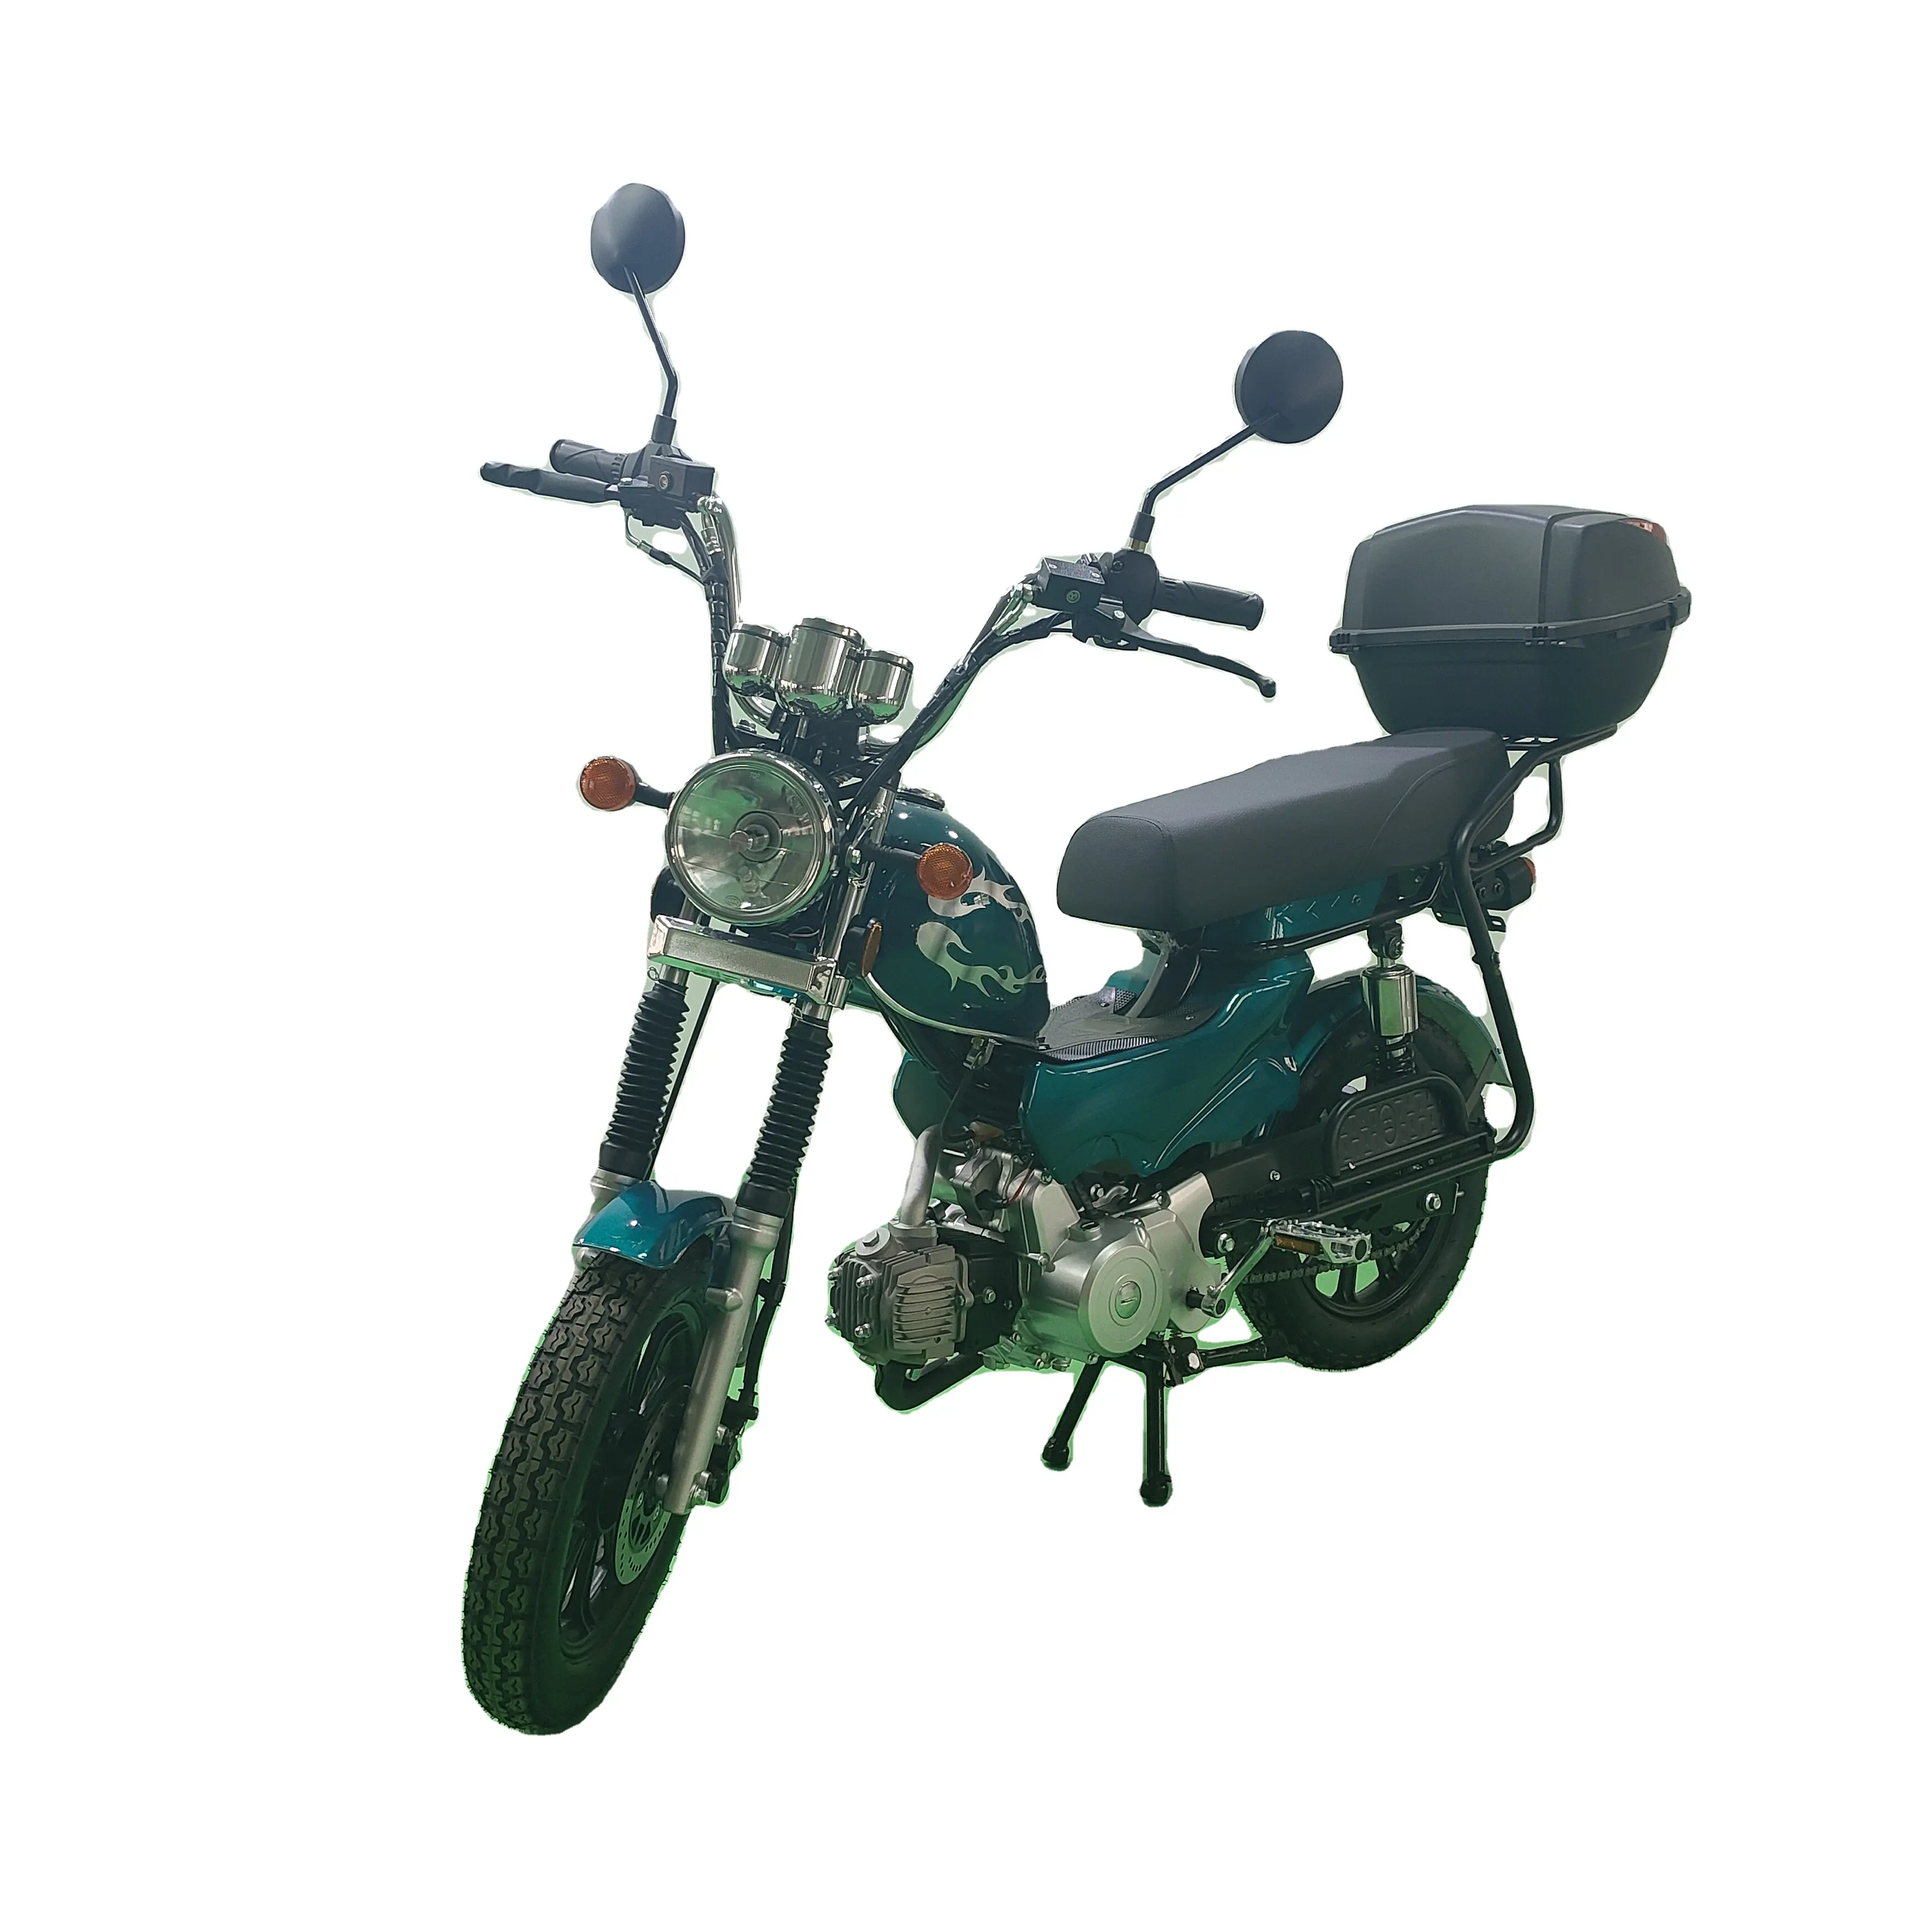 800w 48v Factory direct Adult Electric Motorcycle for Sale